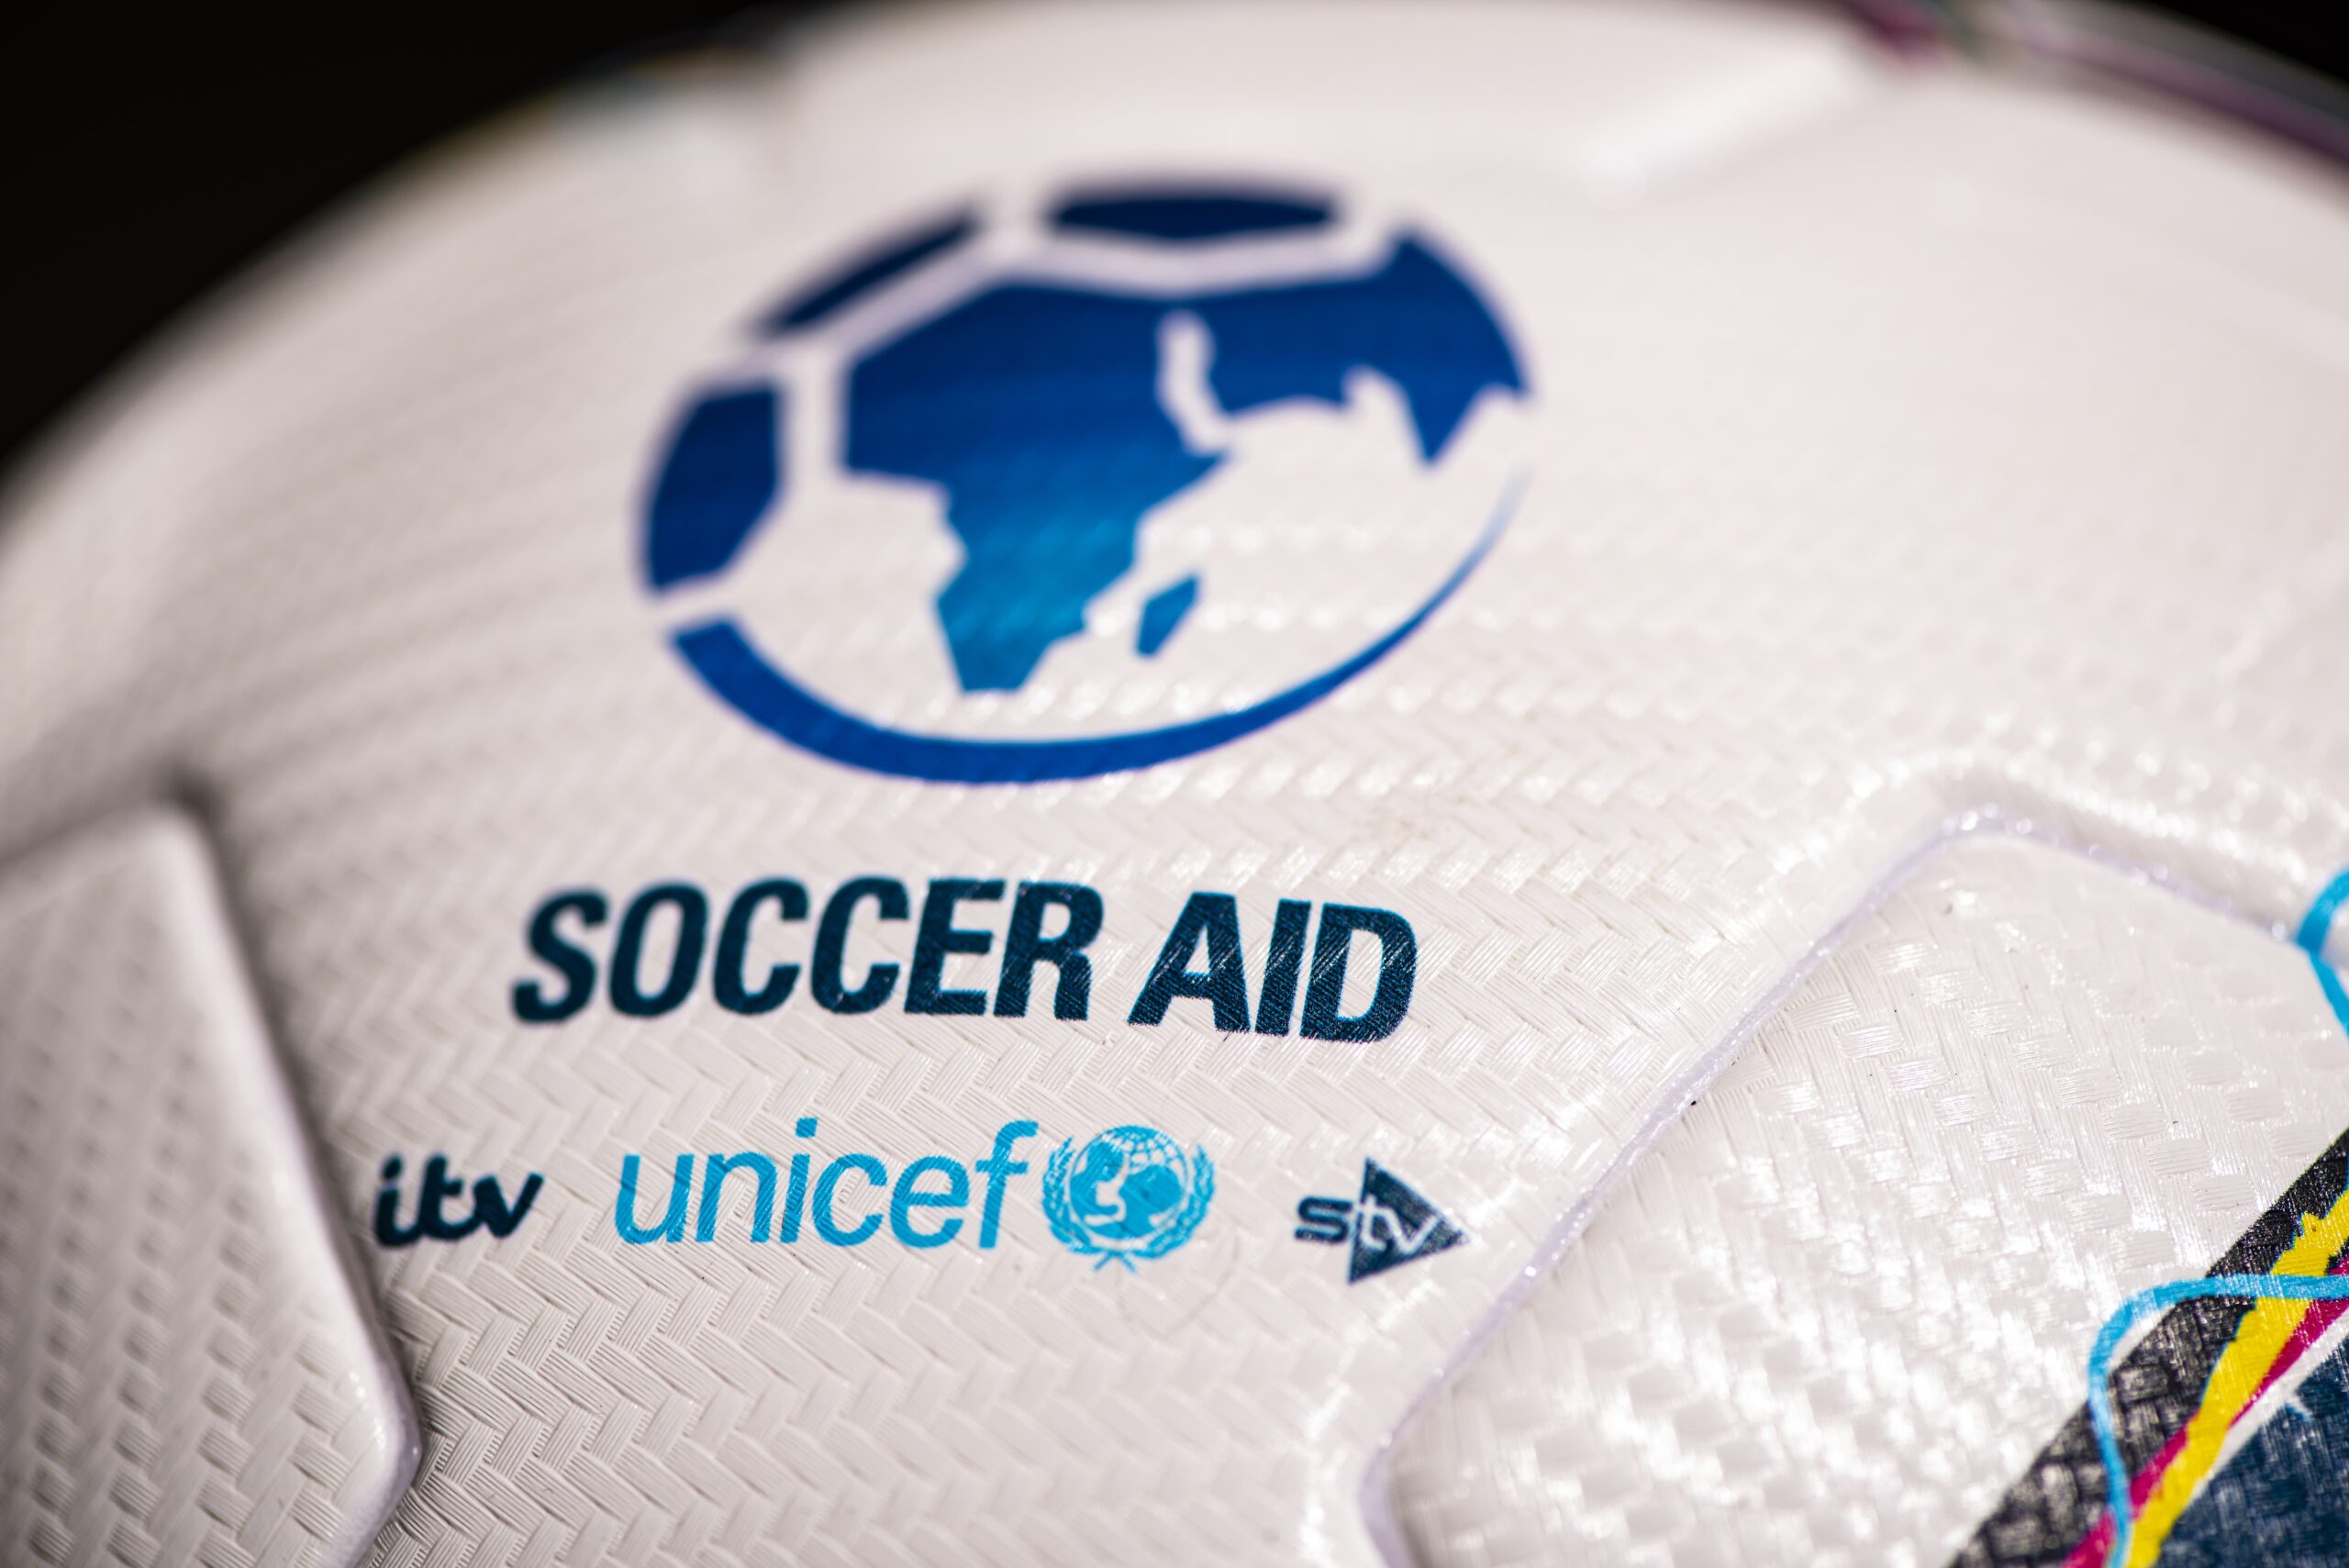 Soccer aid for unicef announces renewed collaboration with disney